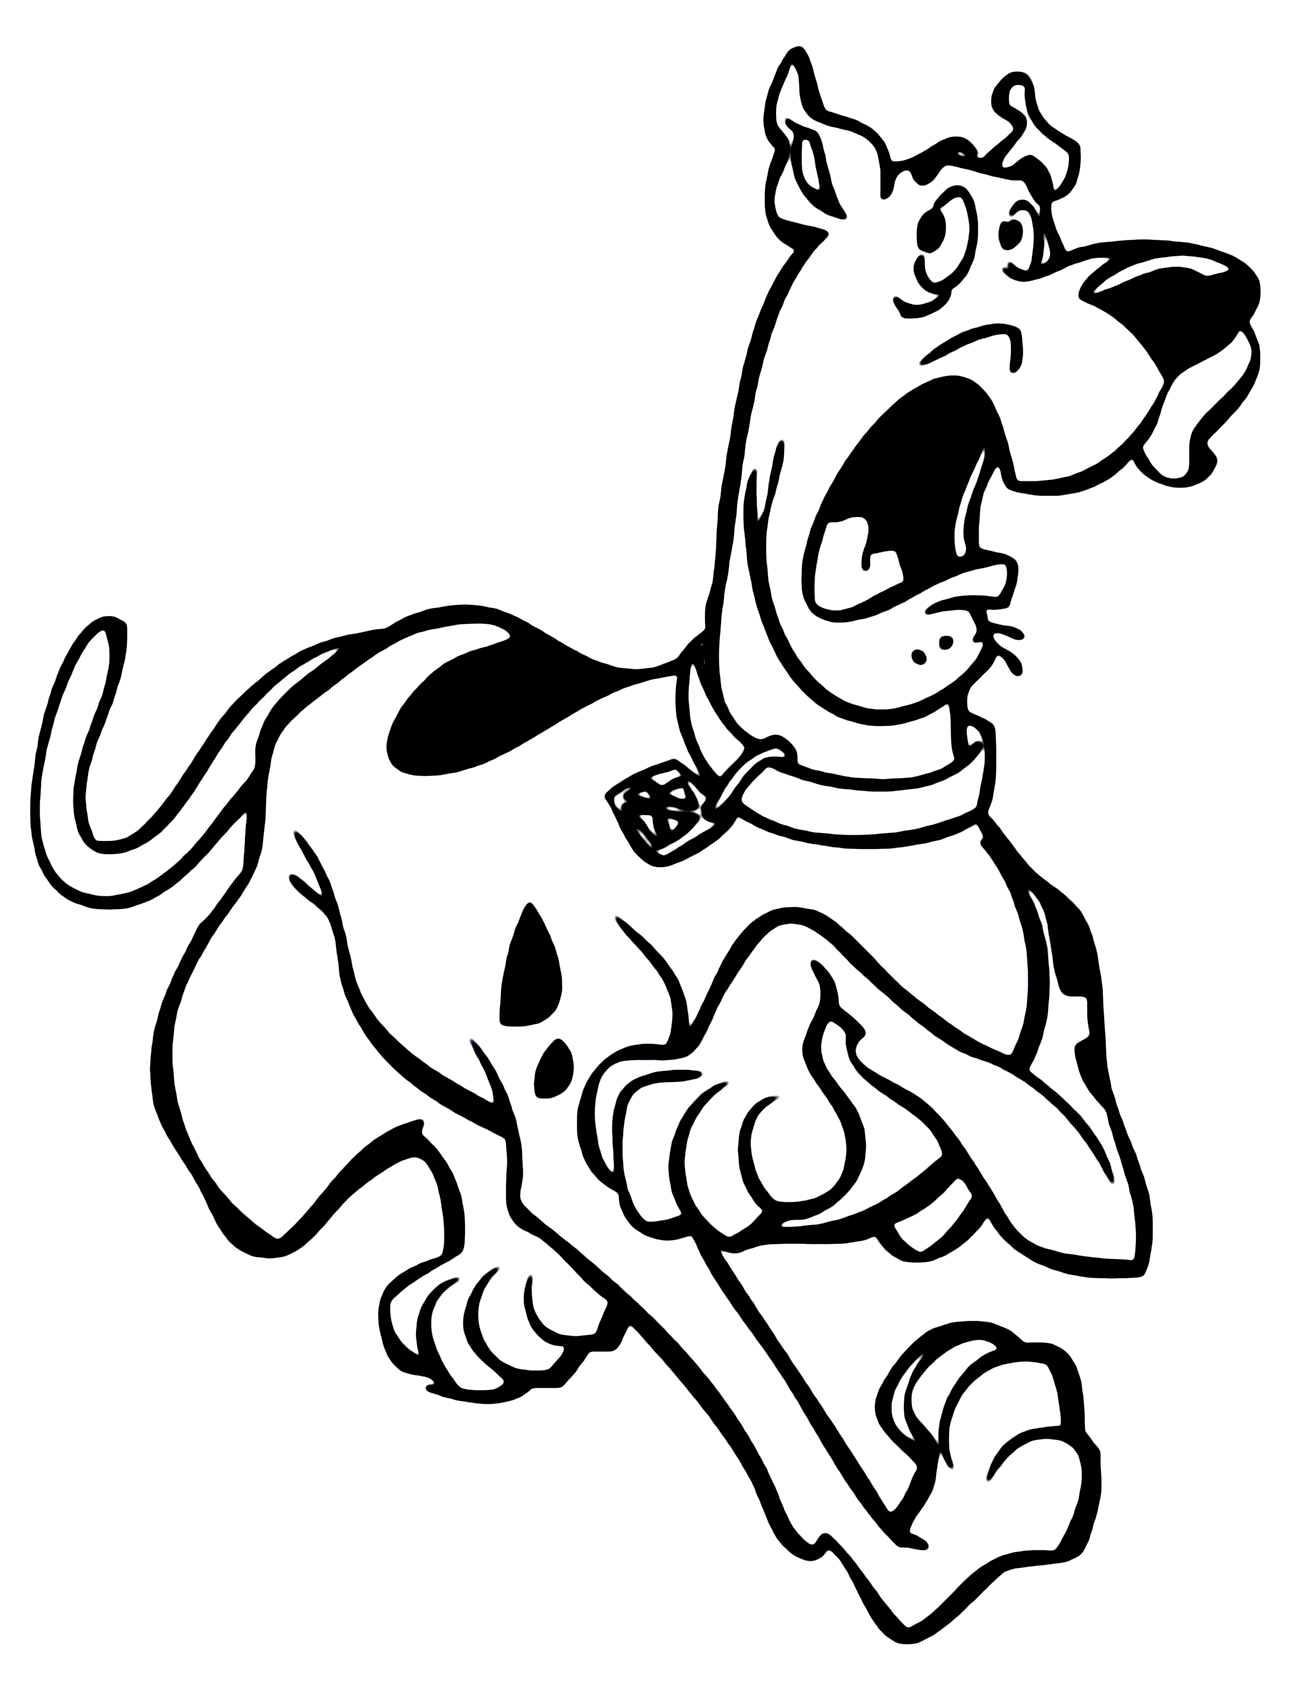 Poor Frightened Scooby Doo Coloring Page